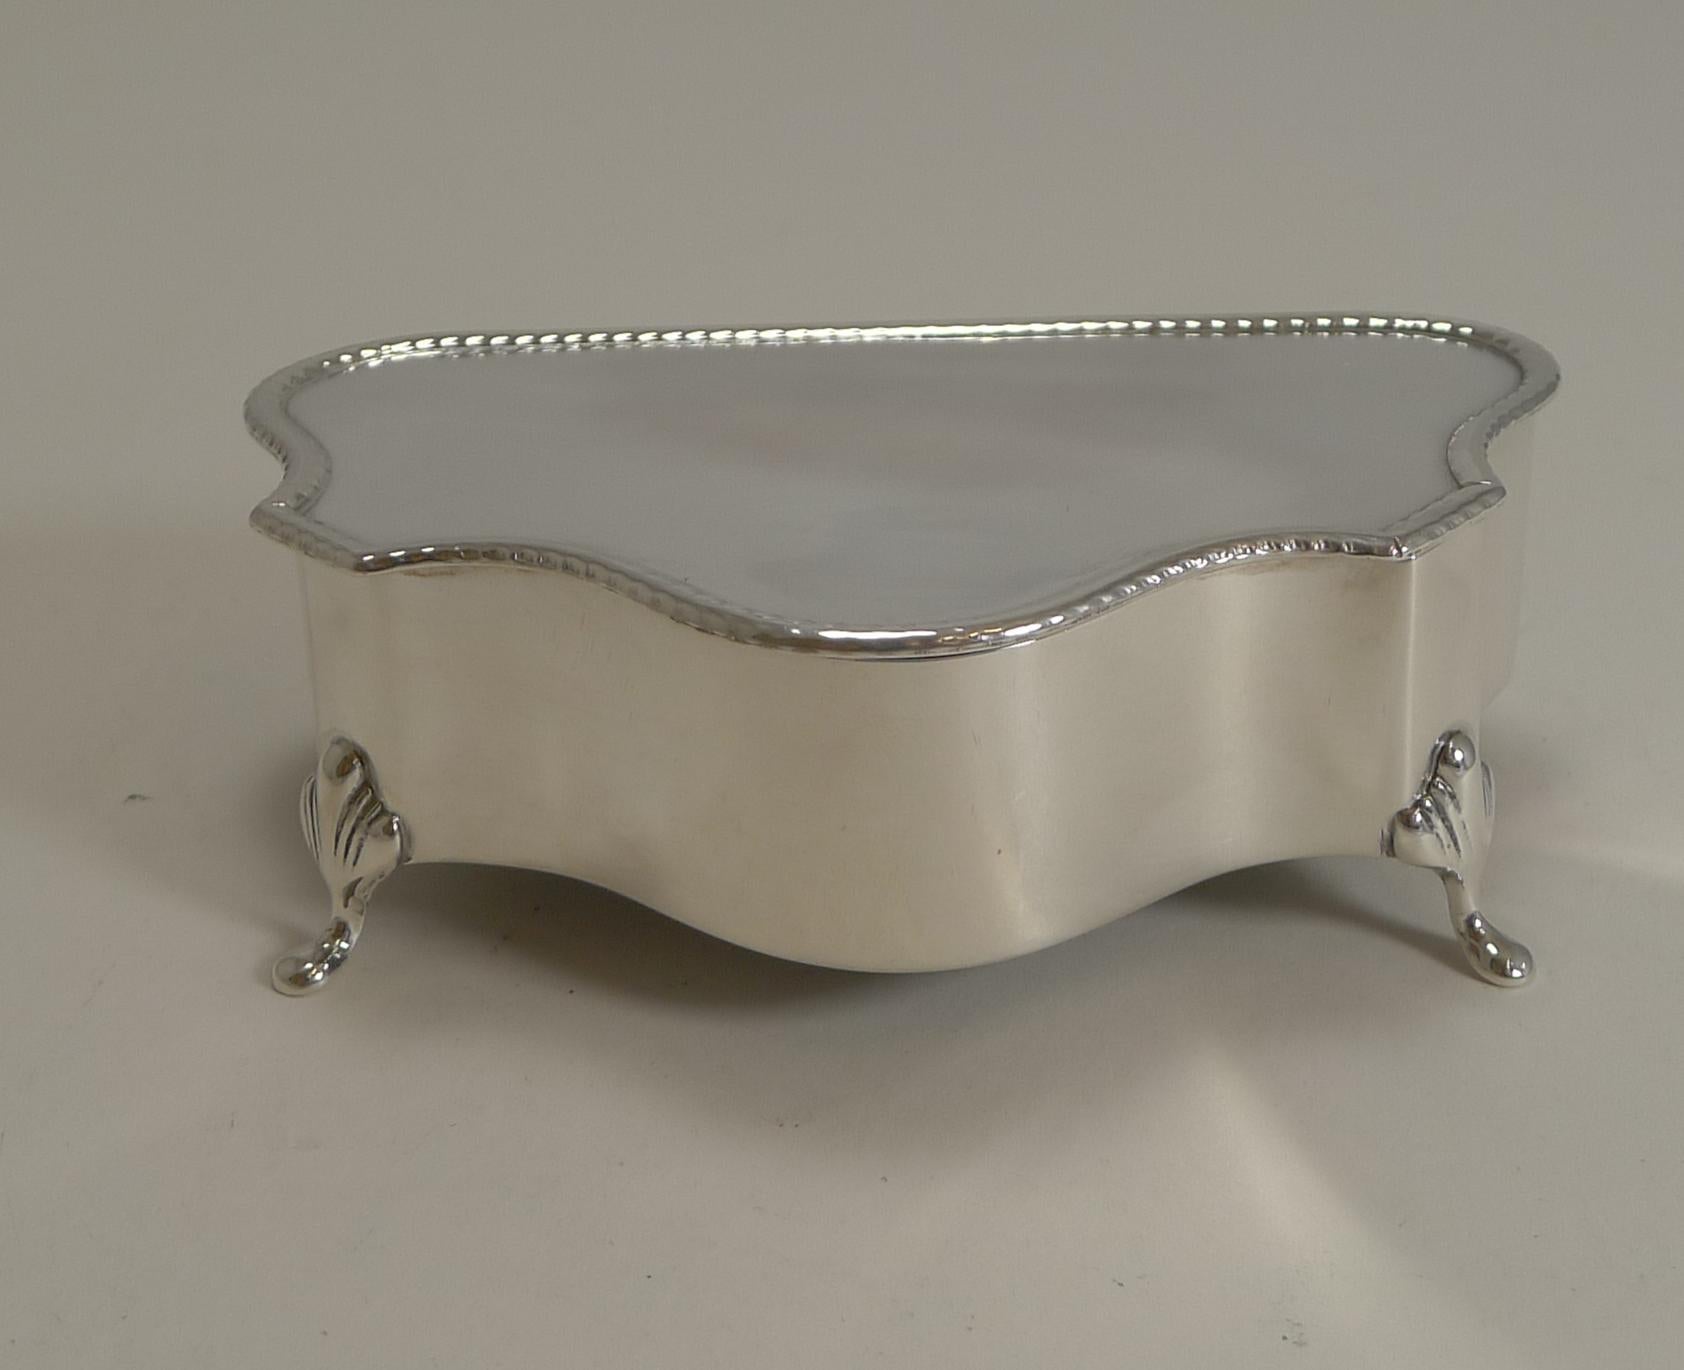 A beautiful and heavy sterling silver box beautifully shaped and standing on four very elegant feet.

A simple design with the border of the lid decorated with a rope design.

The hinged lid opens to reveal a black velvet lined interior, fresh